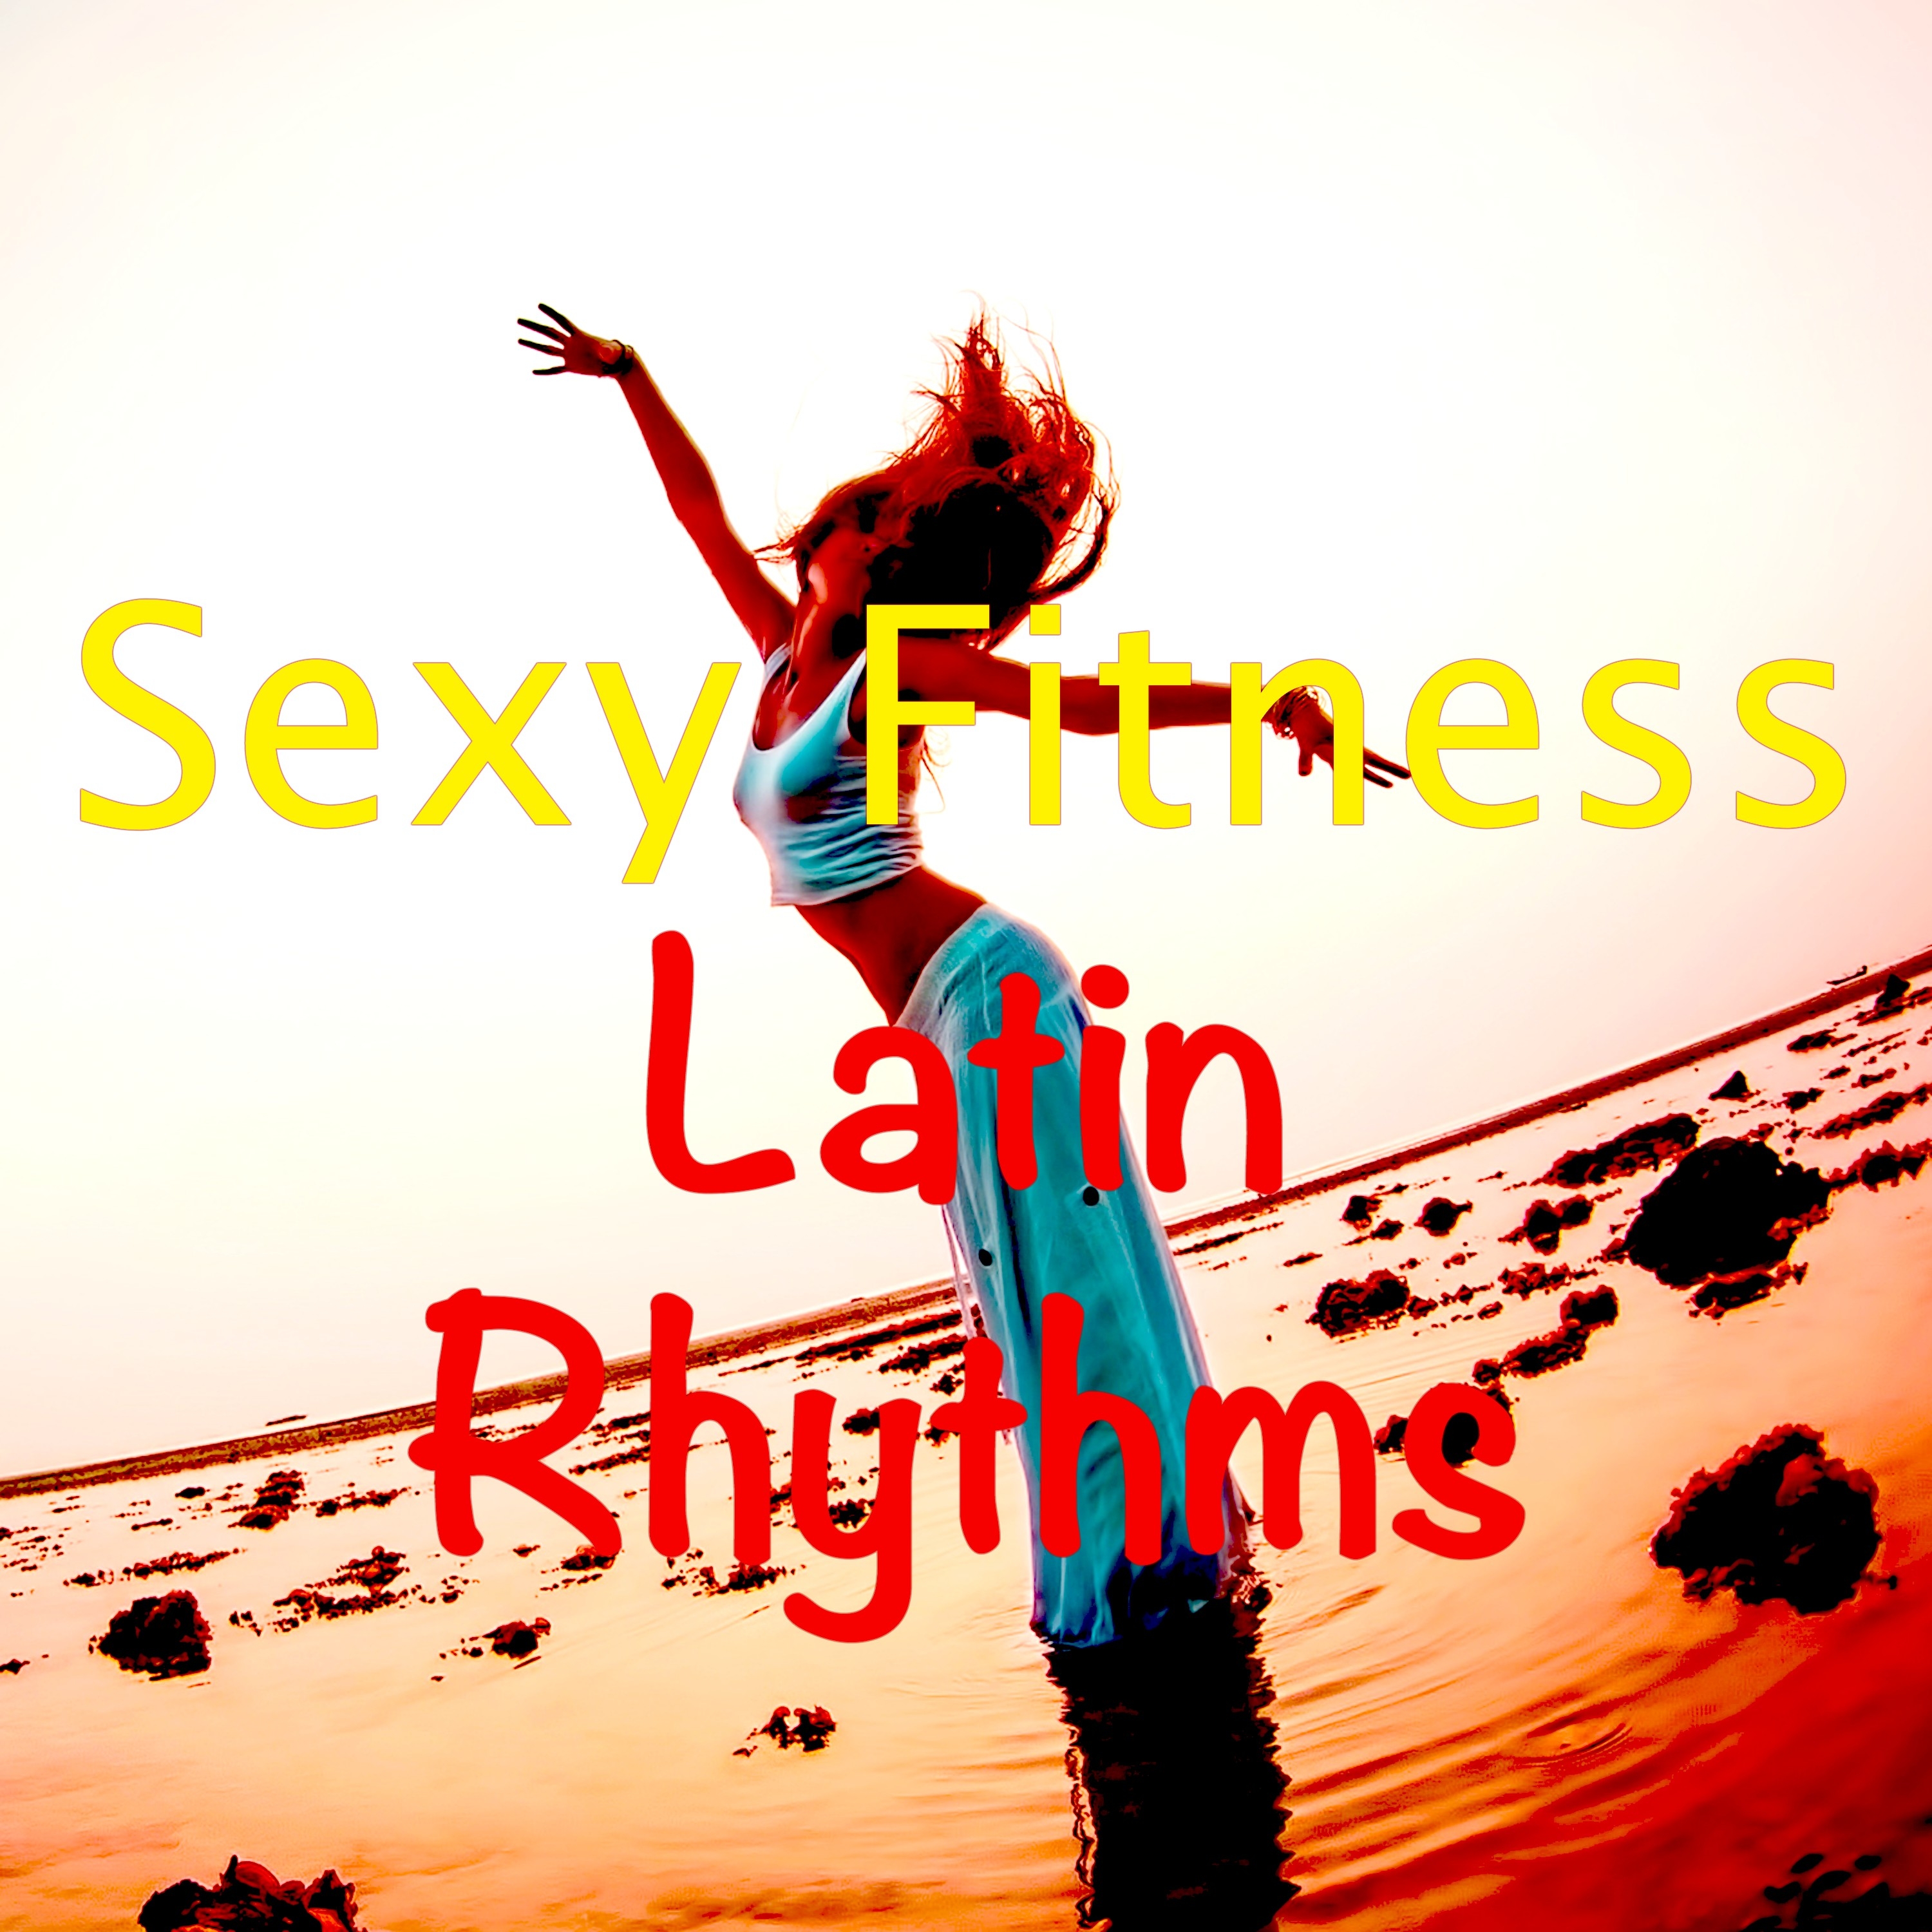 Fitness Latin Rhythms  Ritmo Latino for Your Fitness Routine, Dancing  Beach Workout for a  Body